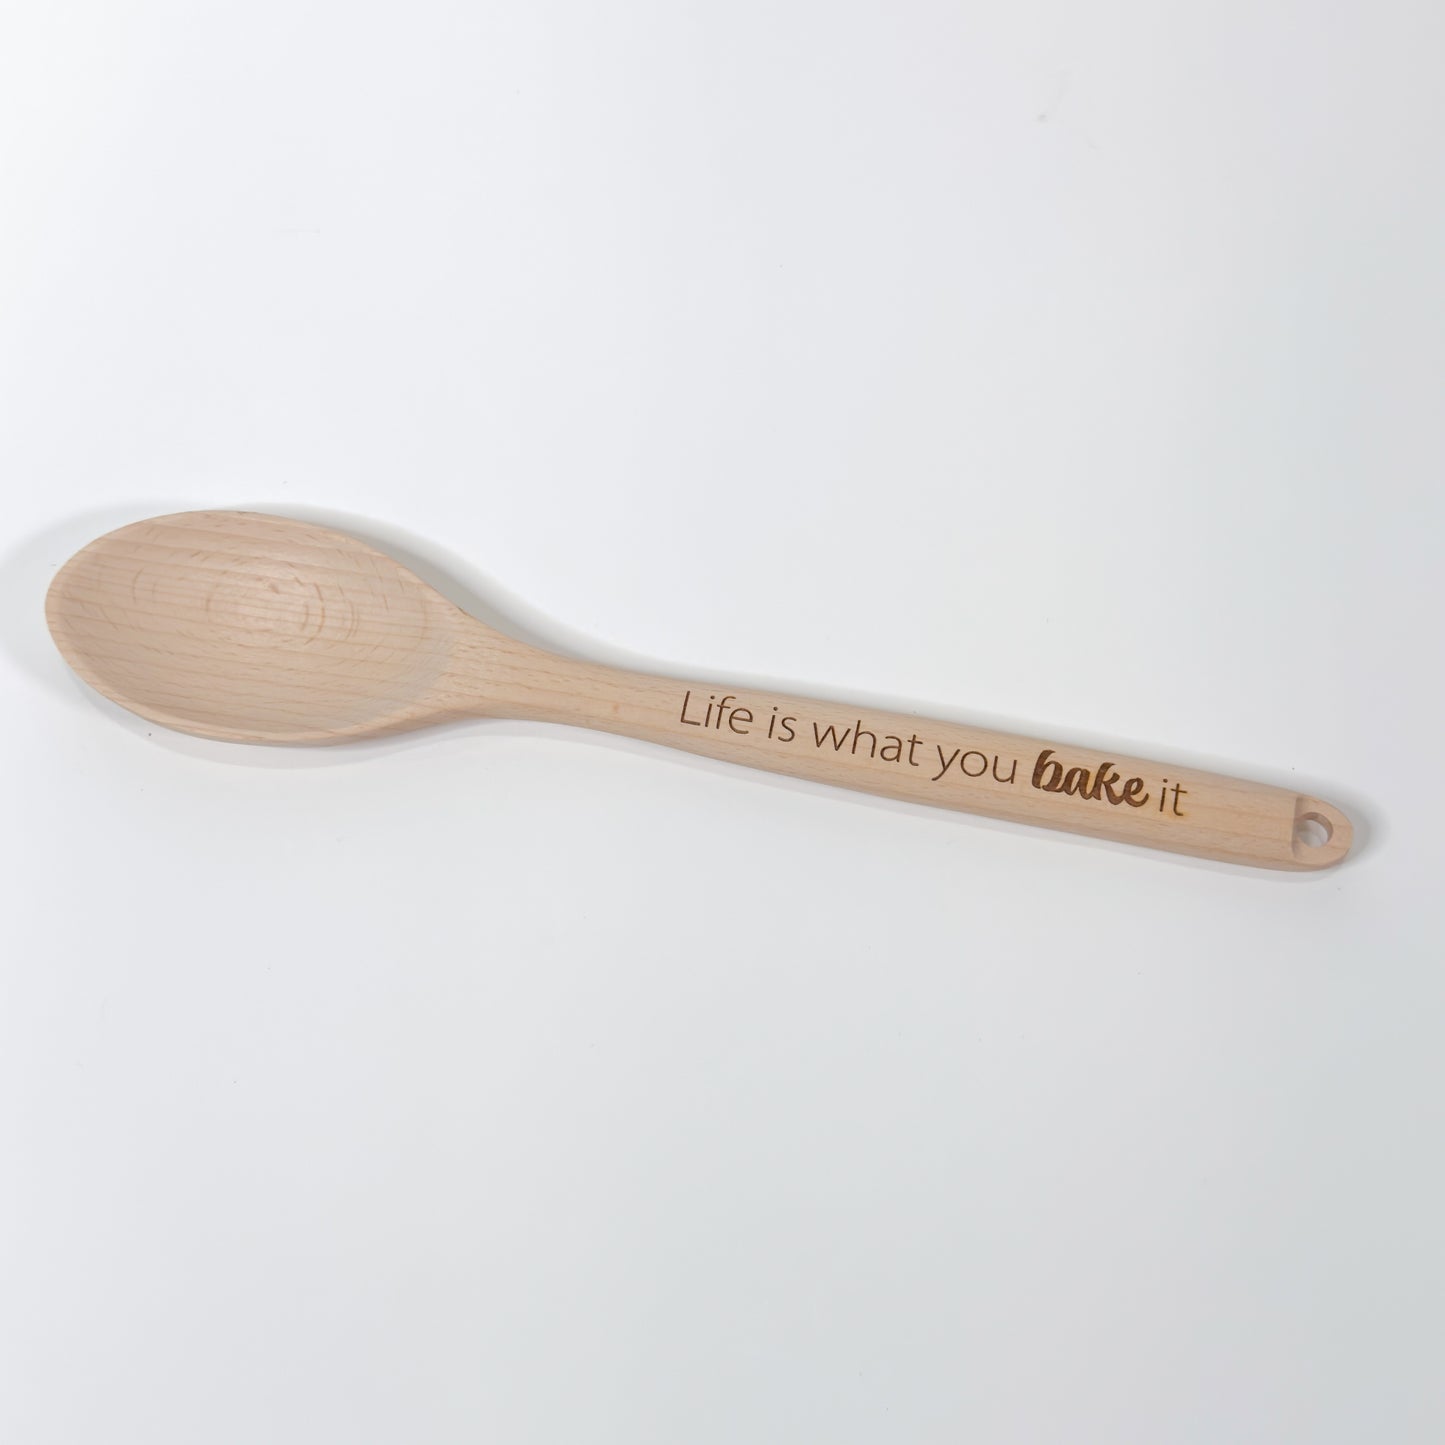 Engraved Wood Spoon, “Life is what you bake it"